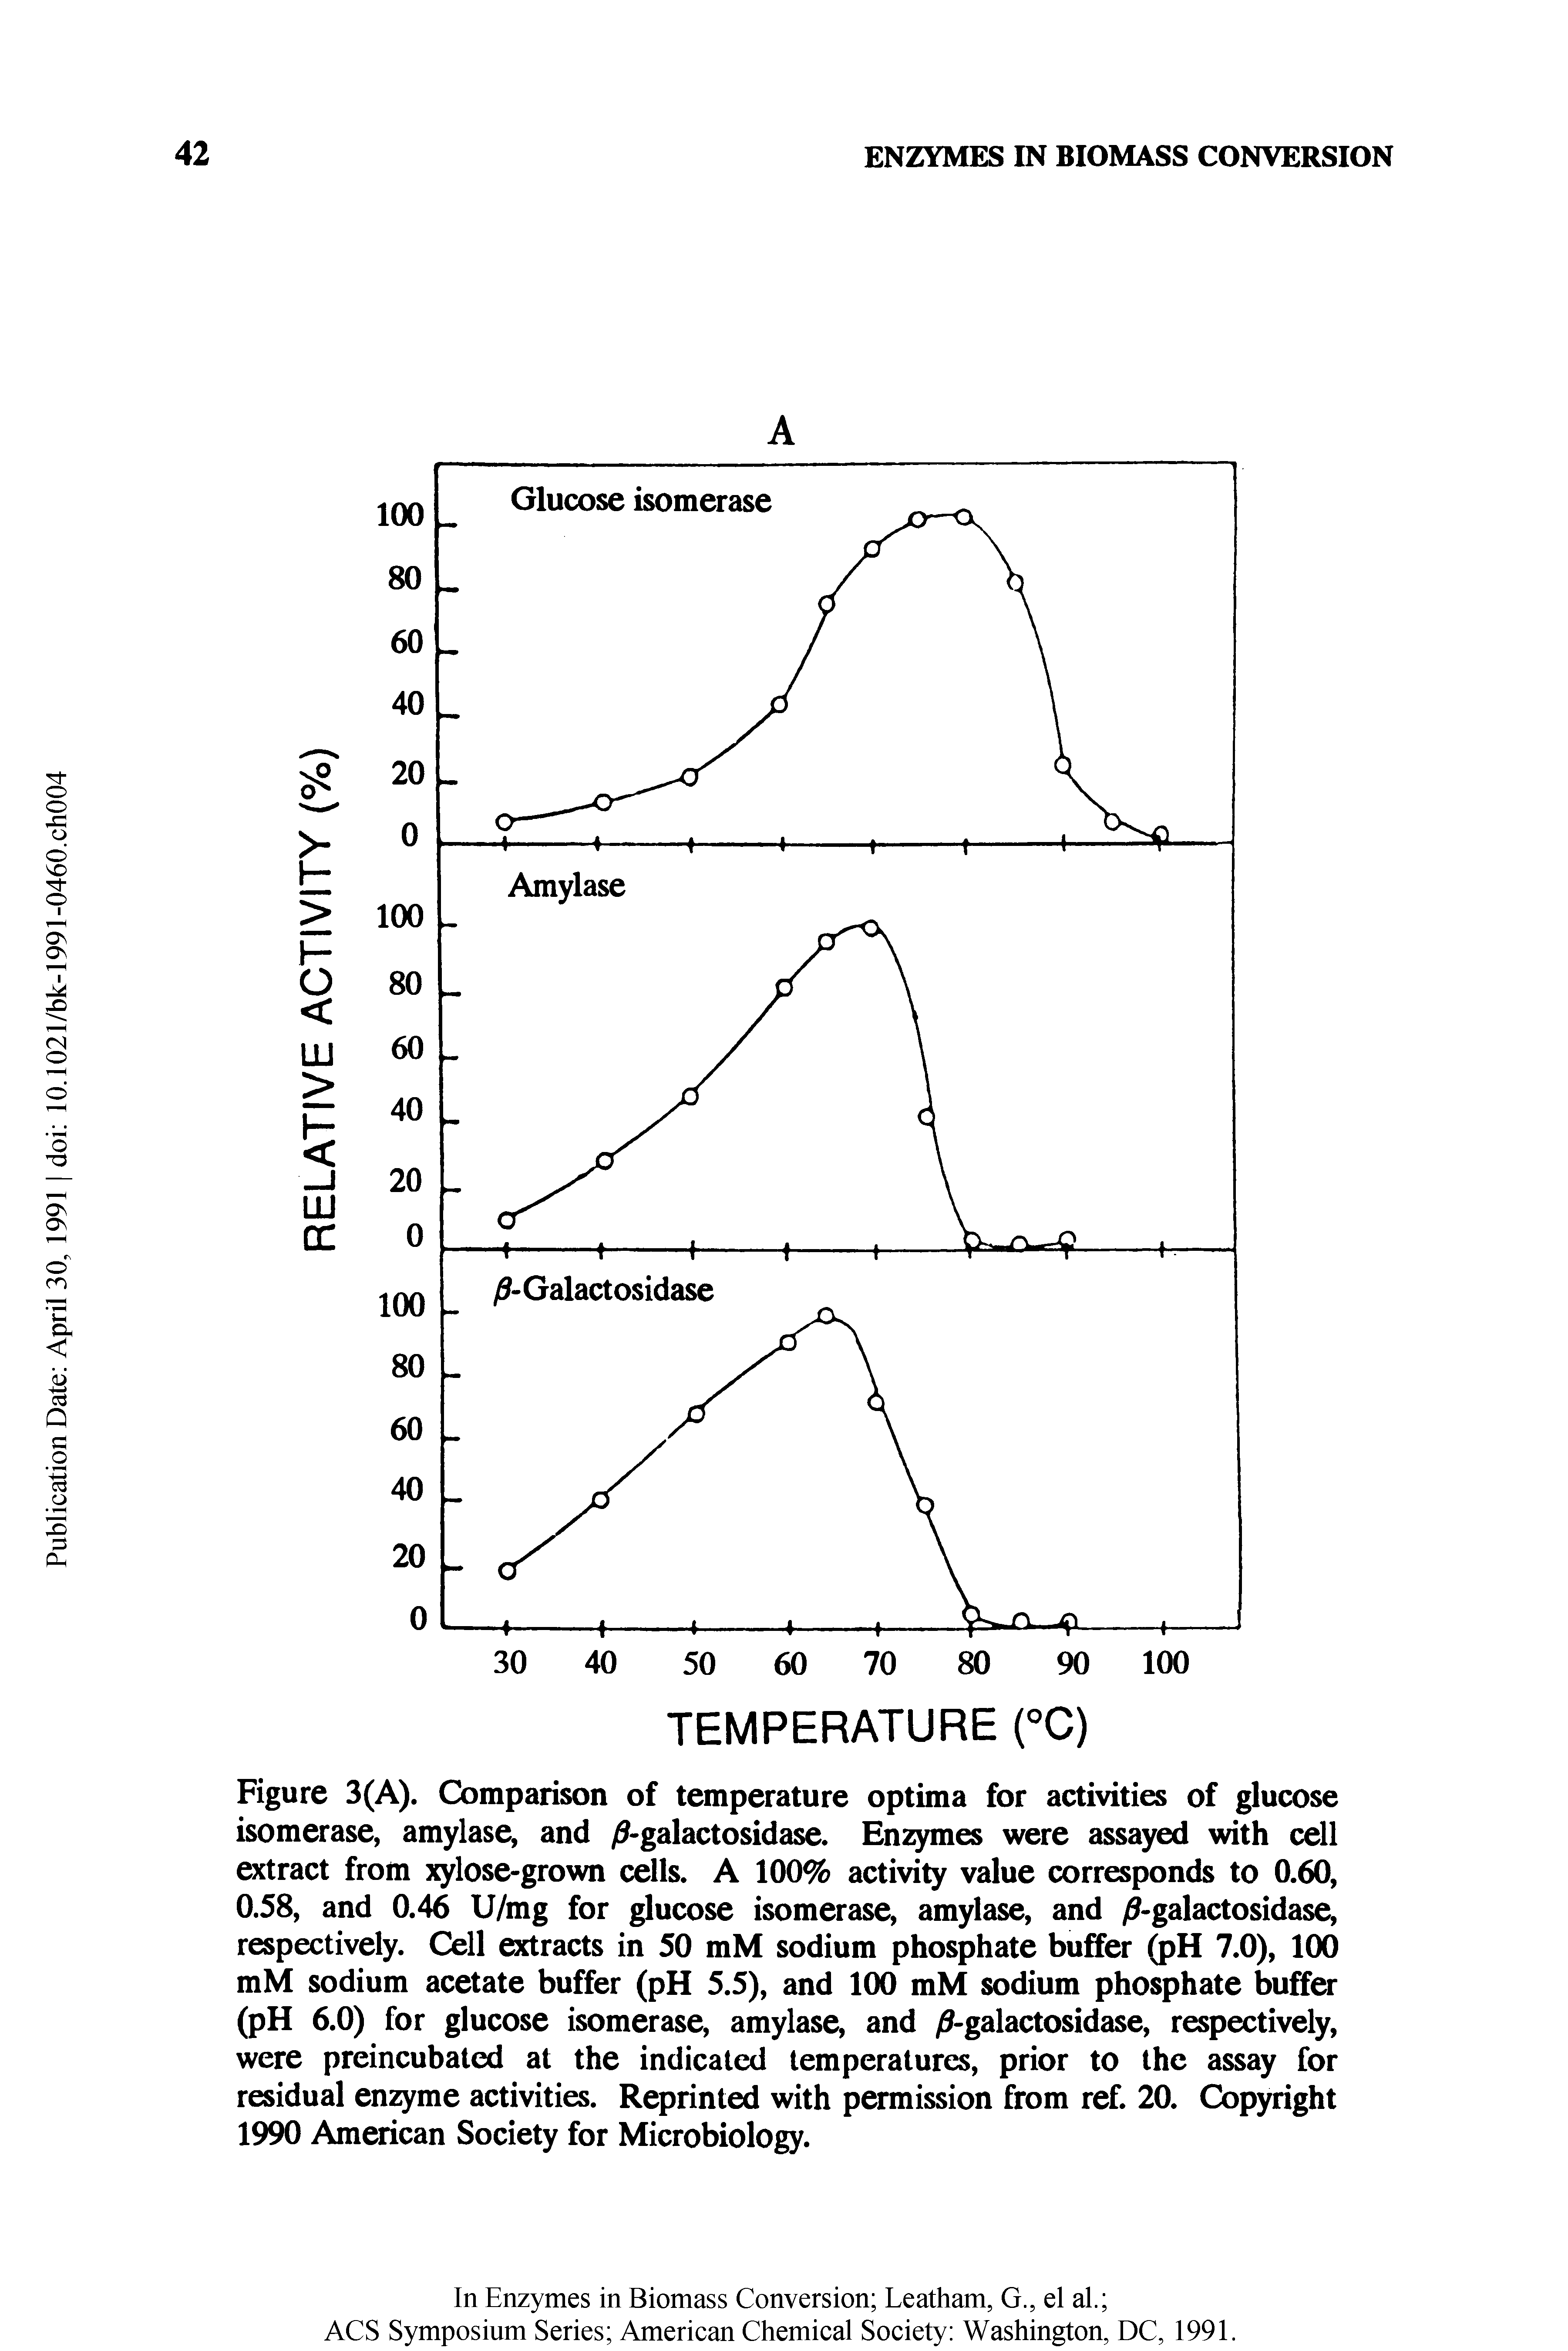 Figure 3(A). Comparison of temperature optima for activities of glucose isomerase, amylase, and >galactosidase. Enzymes were assayed with cell extract from xylose-grown cells. A 100% activity value corresponds to 0.60, 0.58, and 0.46 U/mg for glucose isomerase, amylase, and -galactosidase, respectively. Cell extracts in 50 mM sodium phosphate buffer (pH 7.0), 100 mM sodium acetate buffer (pH 5.5), and 100 mM sodium phosphate buffer (pH 6.0) for glucose isomerase, amylase, and -galactosidase, respectively, were preincubatcd at the indicated temperatures, prior to the assay for residual enzyme activities. Reprinted with permission from ref. 20. Copyright 1990 American Society for Microbiology.